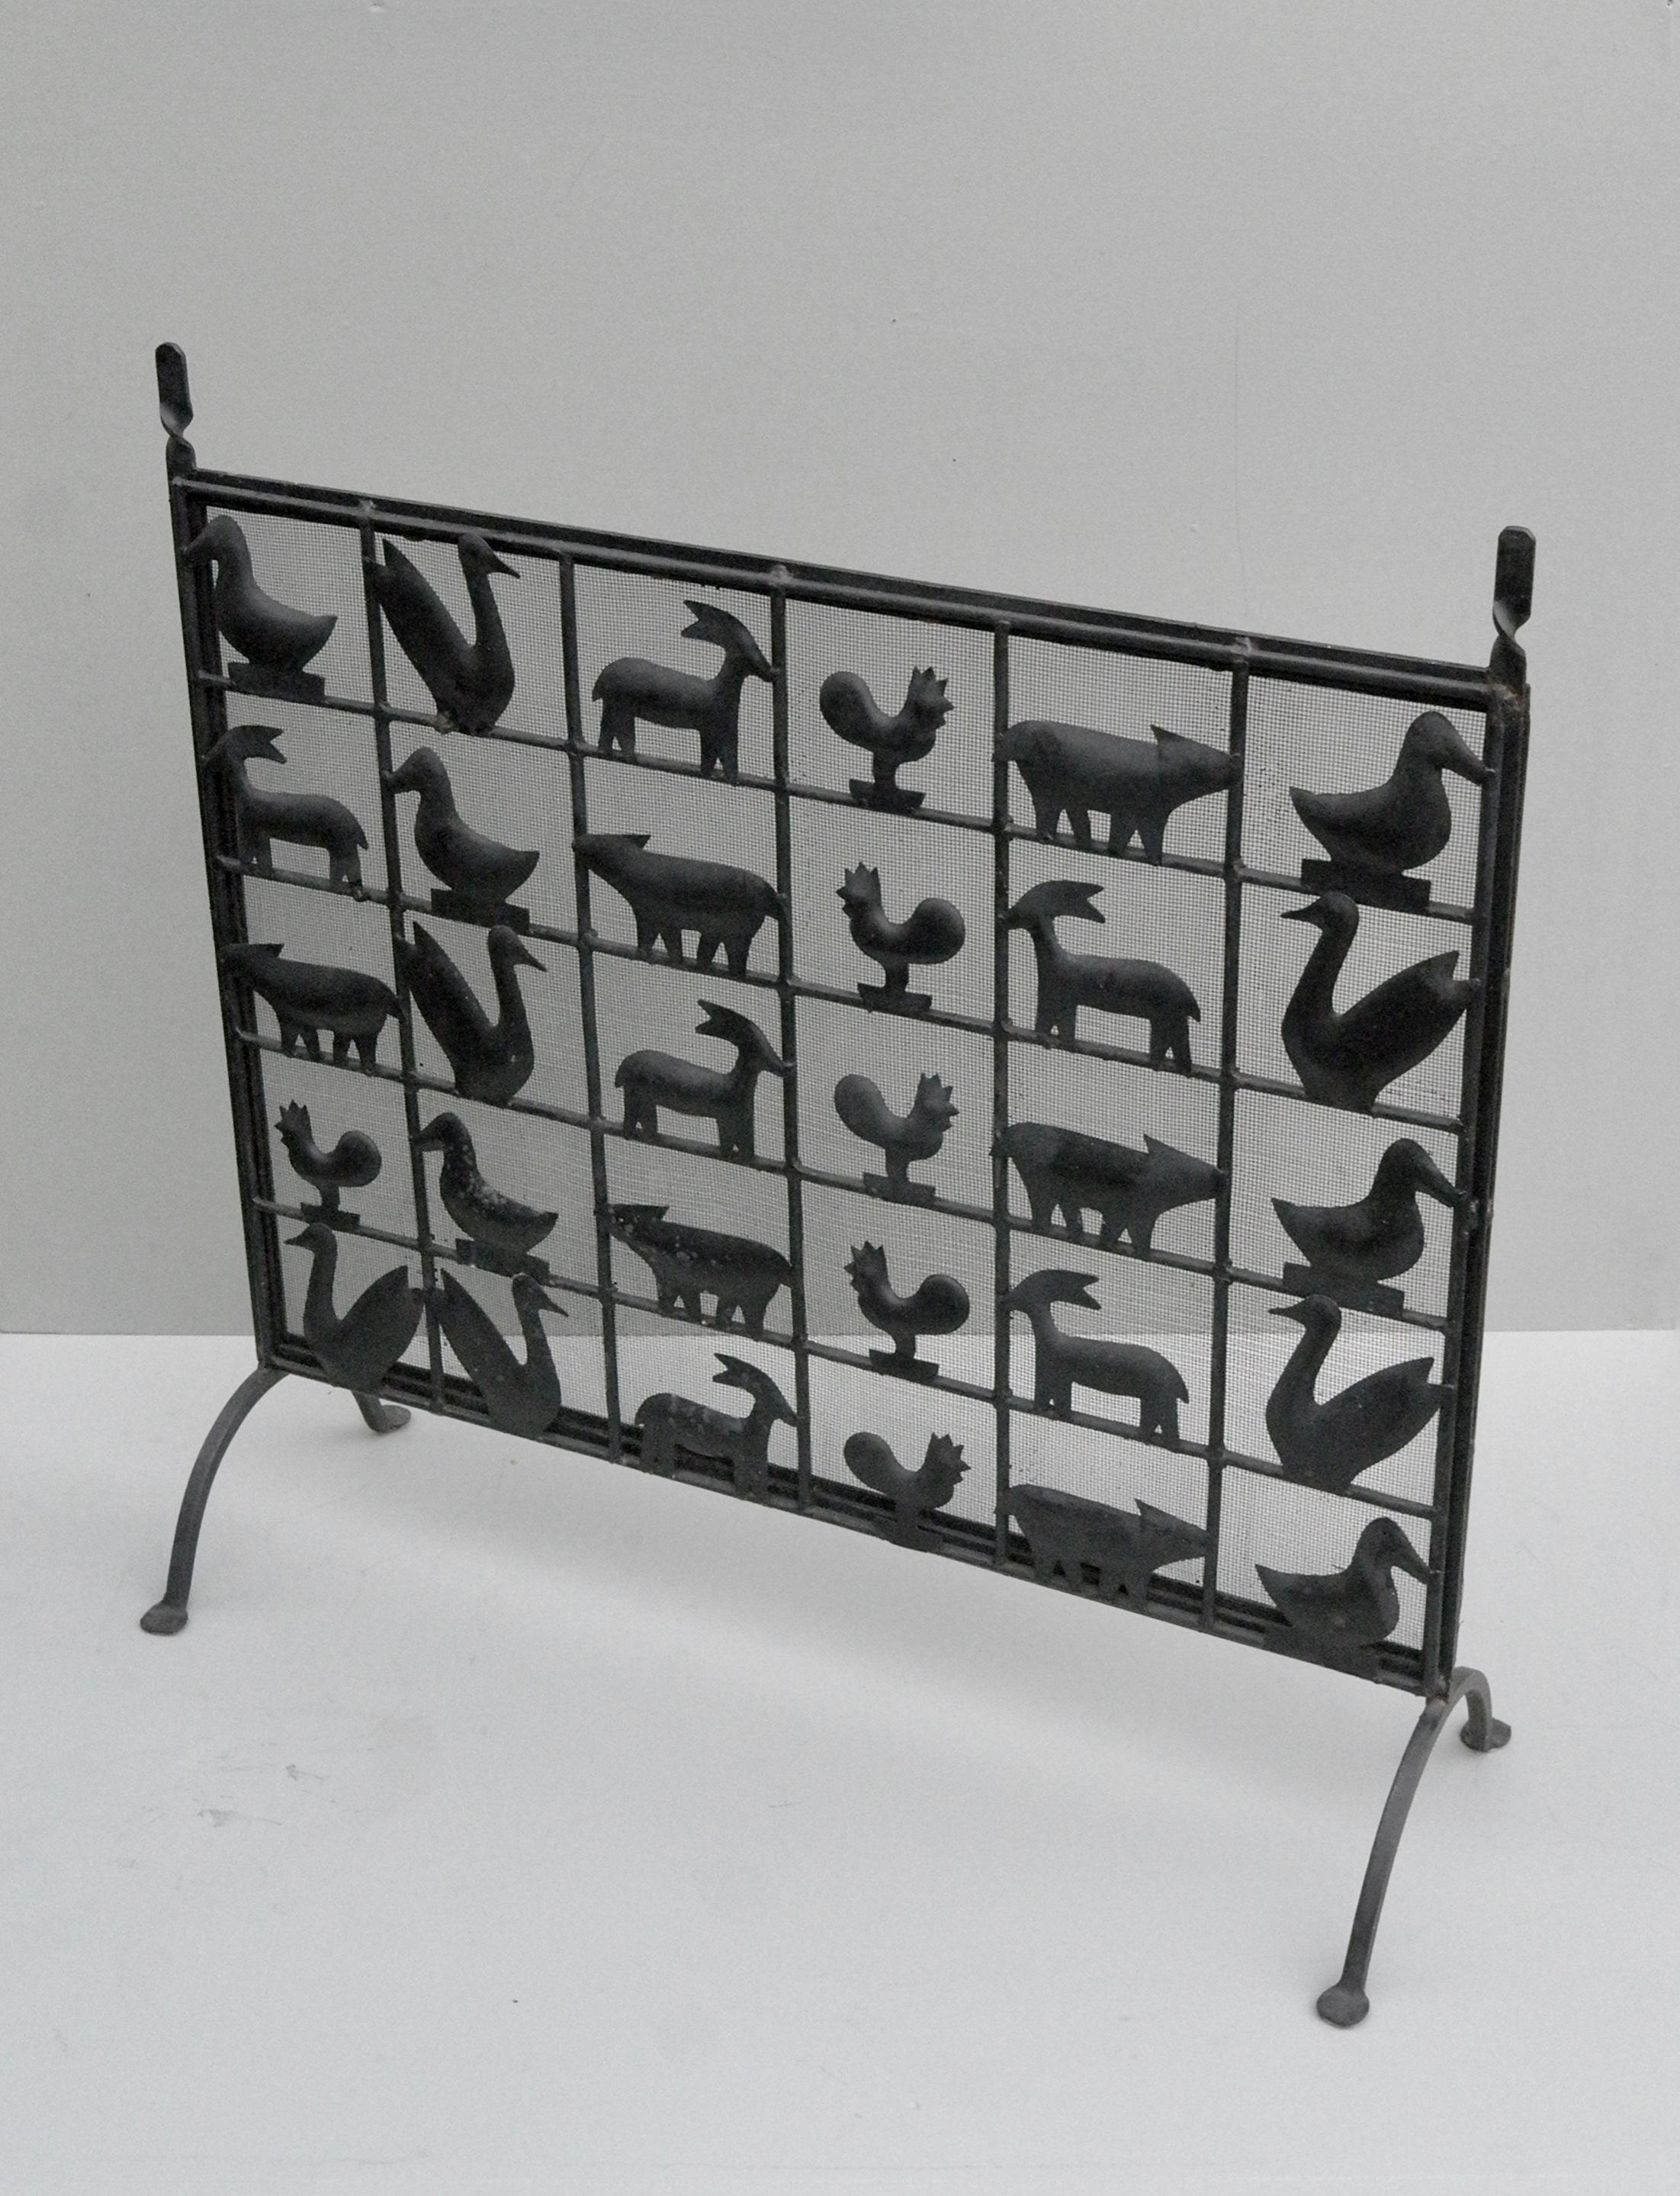 Wrought iron animal fire screen by Atelier Marolles, France, 1955. Very decorative and useful piece with dense mesh against the sparks.